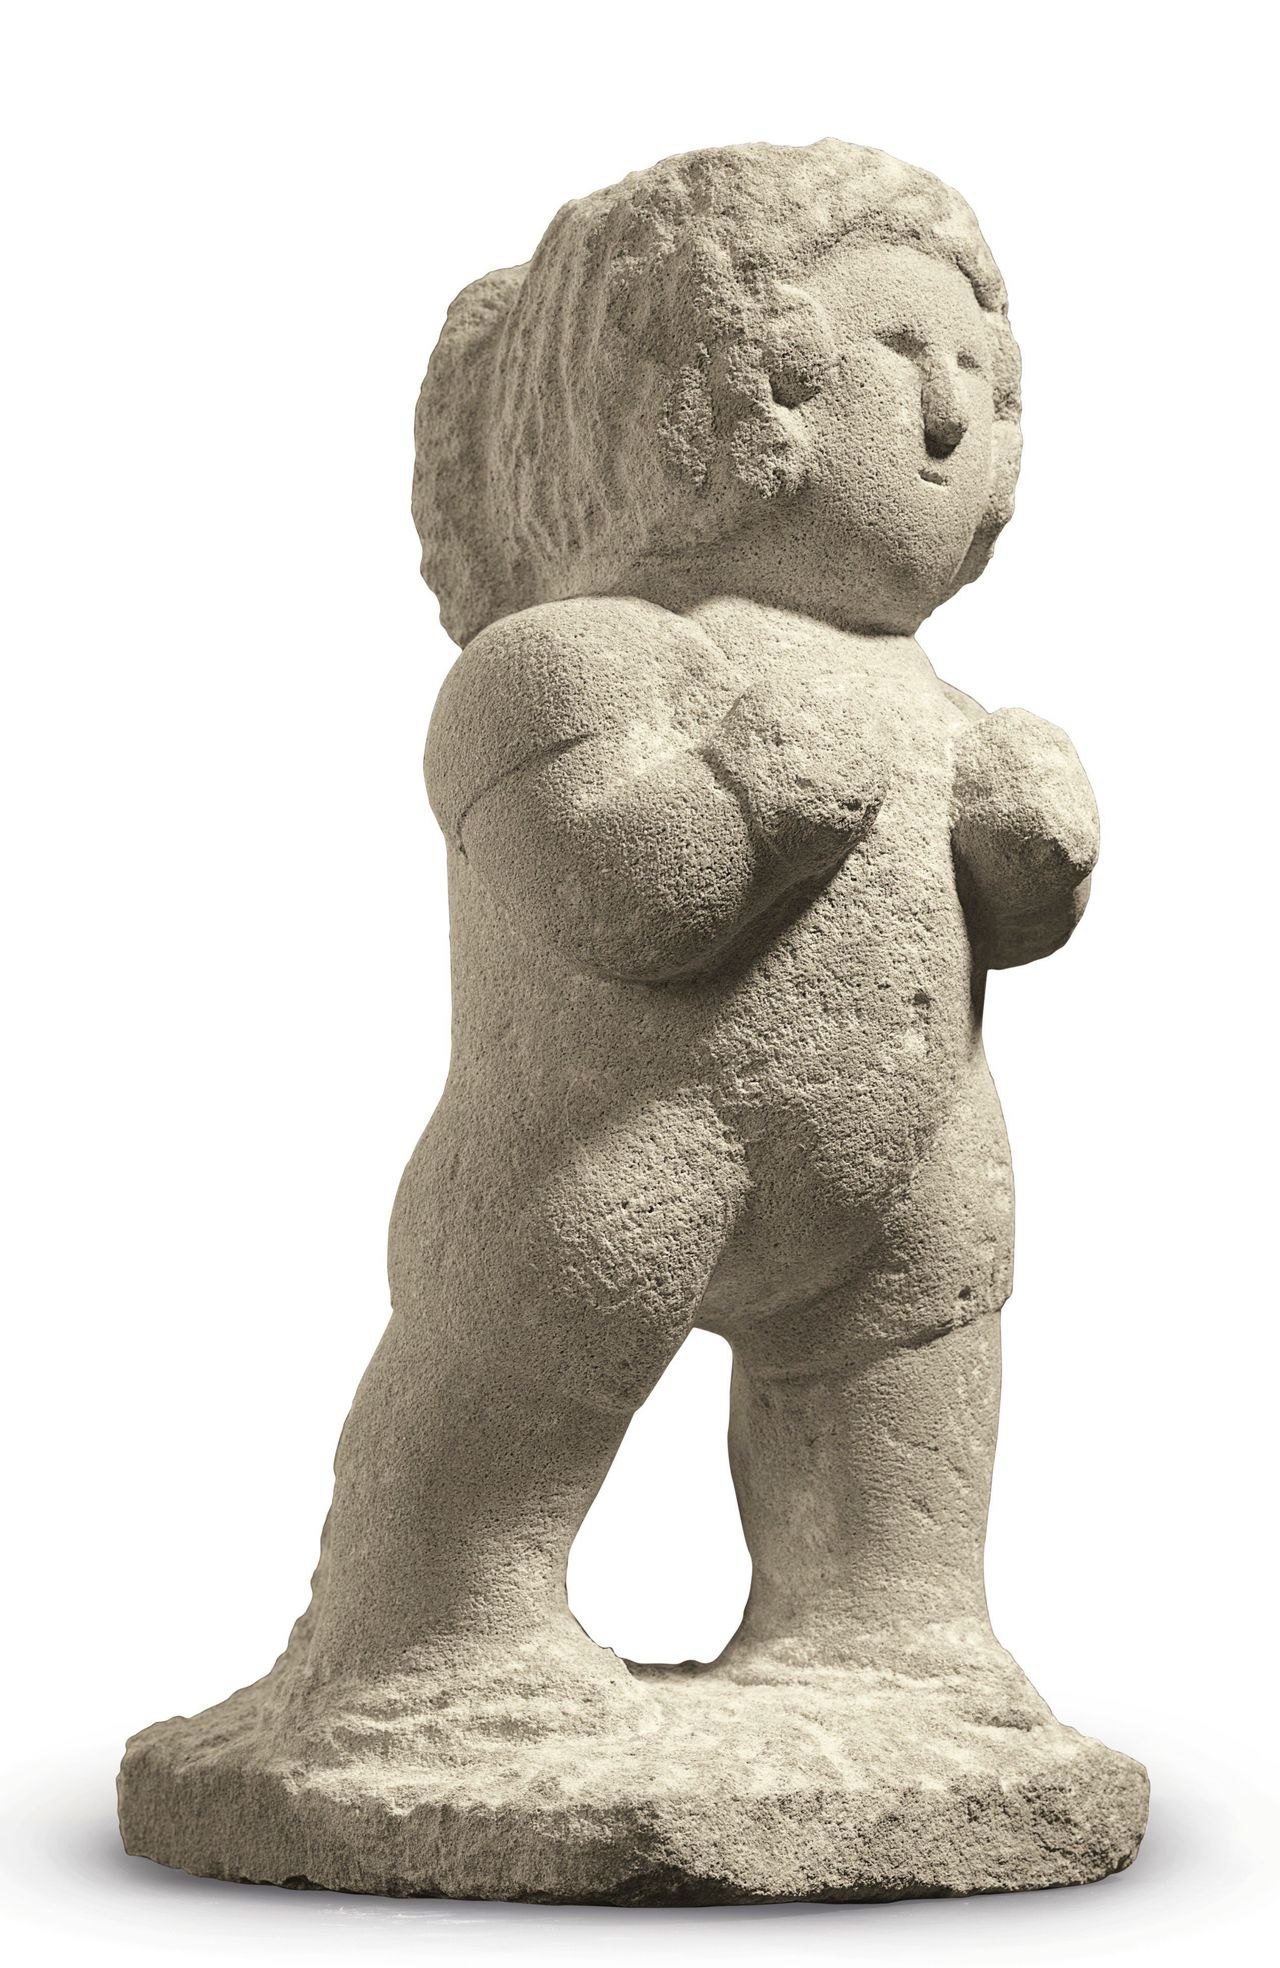 An iconic masterwork by renowned African American artist William Edmondson (1874-1951), "Boxer" is an incredibly sophisticated object. Likely modeled after Joe Louis, it is one of the most important sculptures created in interwar America.